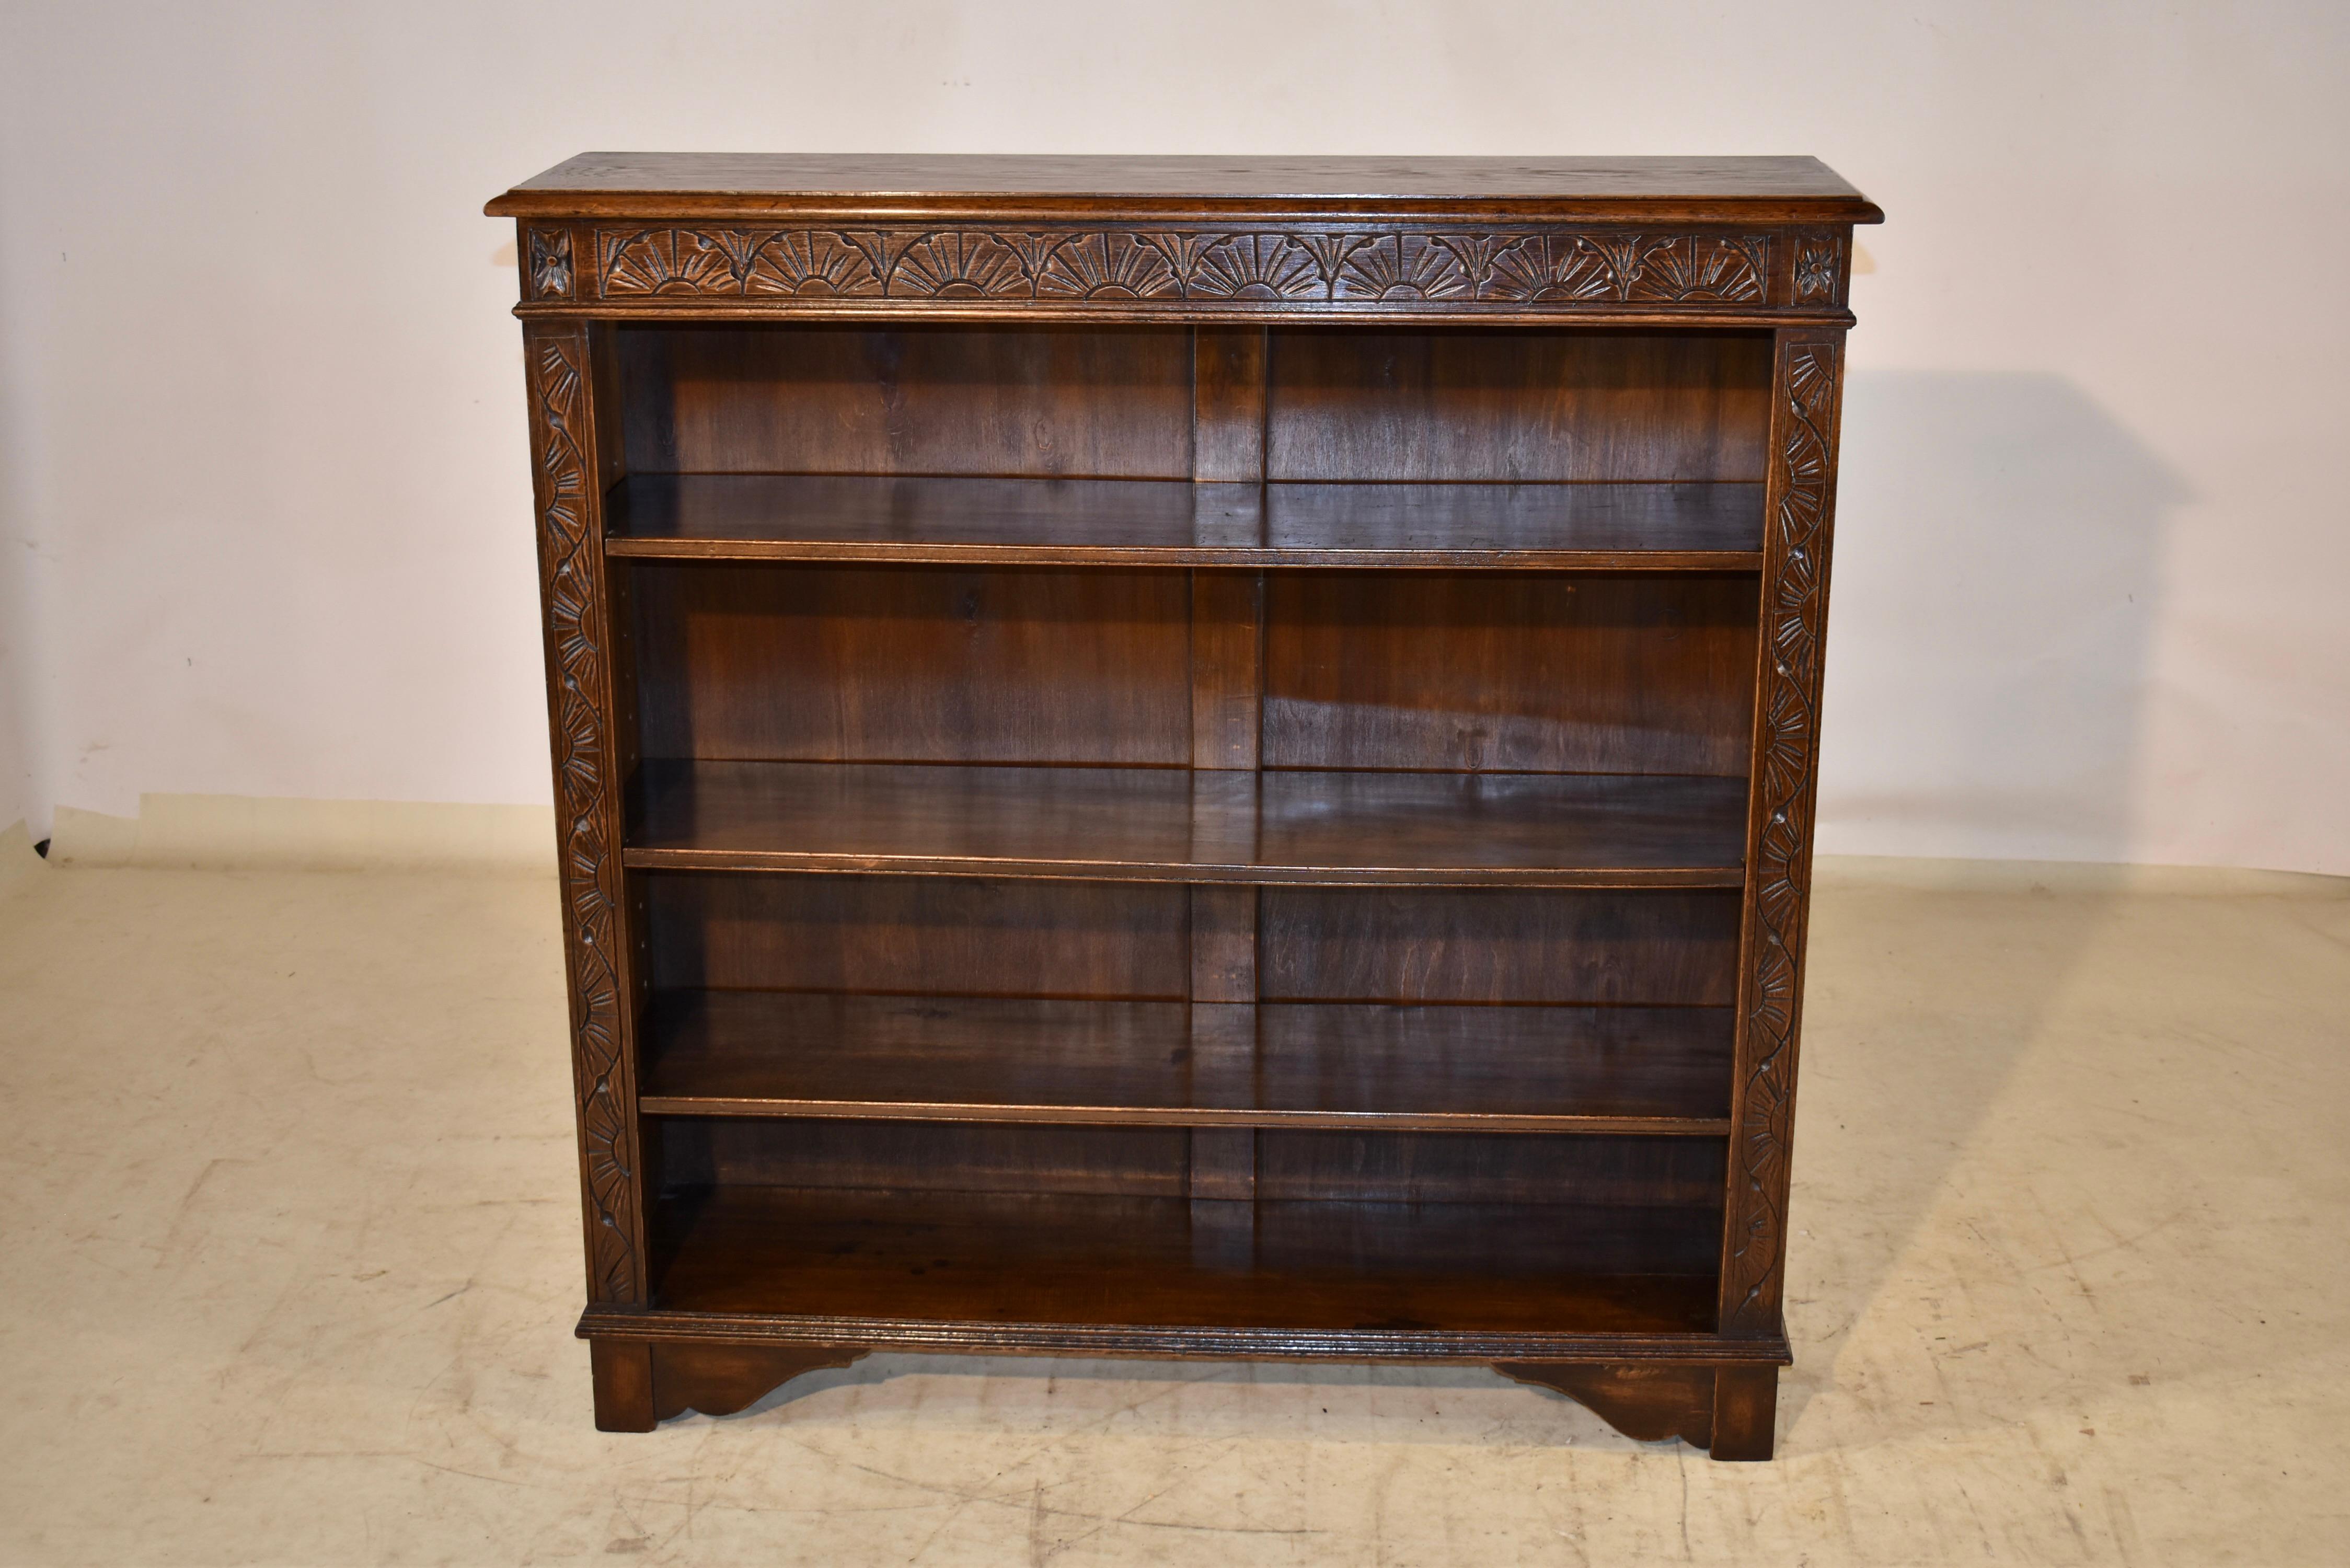 Late 19th century oak bookcase from England. the top has a beveled edge and follows down to simple sides and a carved case on the front, for added design interest. The bookcase has three moveable shelves, and the bottom shelf is stationary. The case